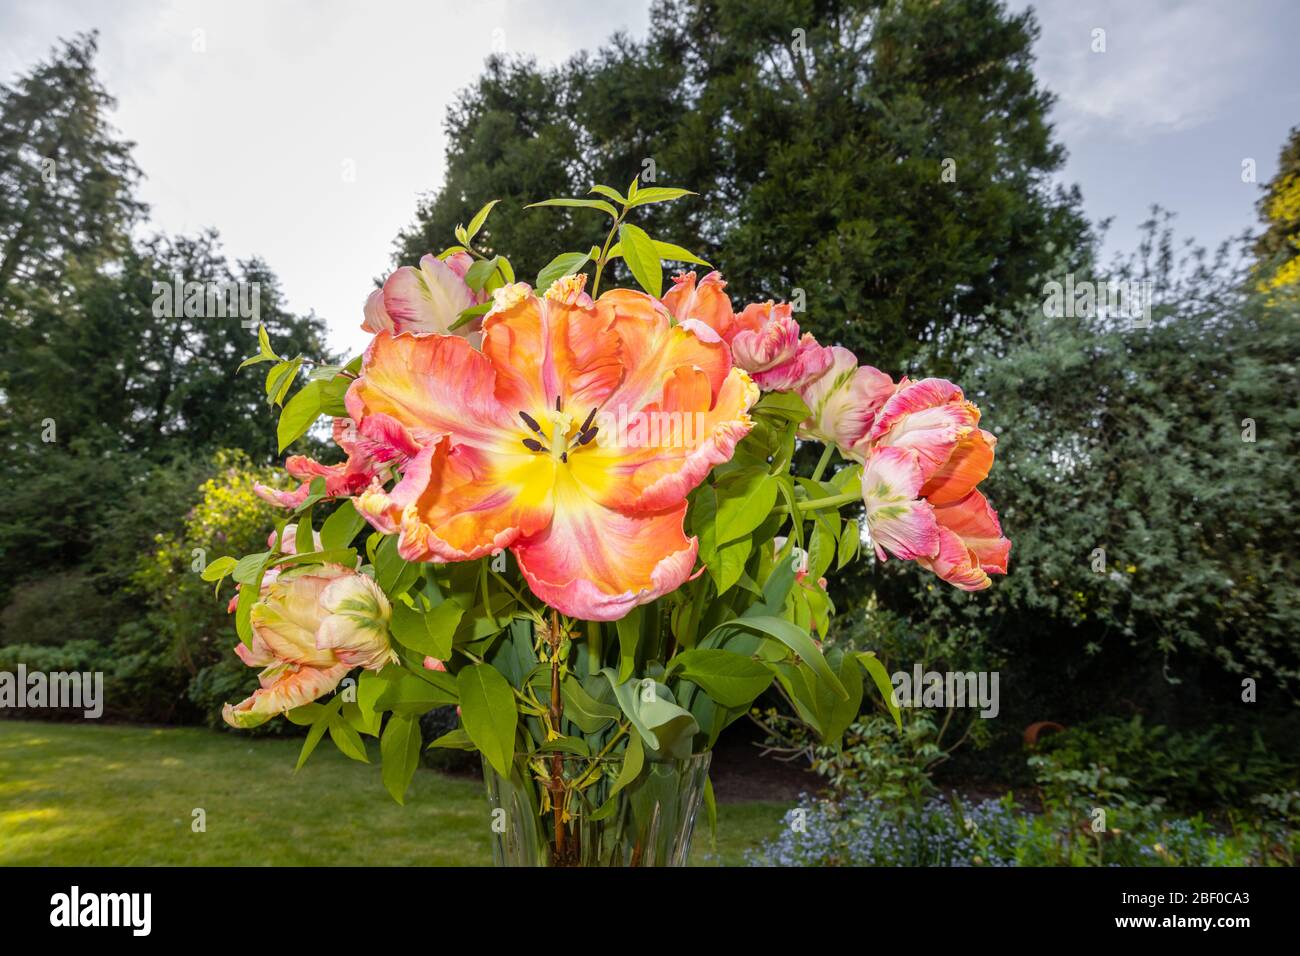 Arrangement of large multi-coloured Apricot Parrot tulips with irregular shaped frilly petals flowering in late spring, in a garden in Surrey, UK Stock Photo